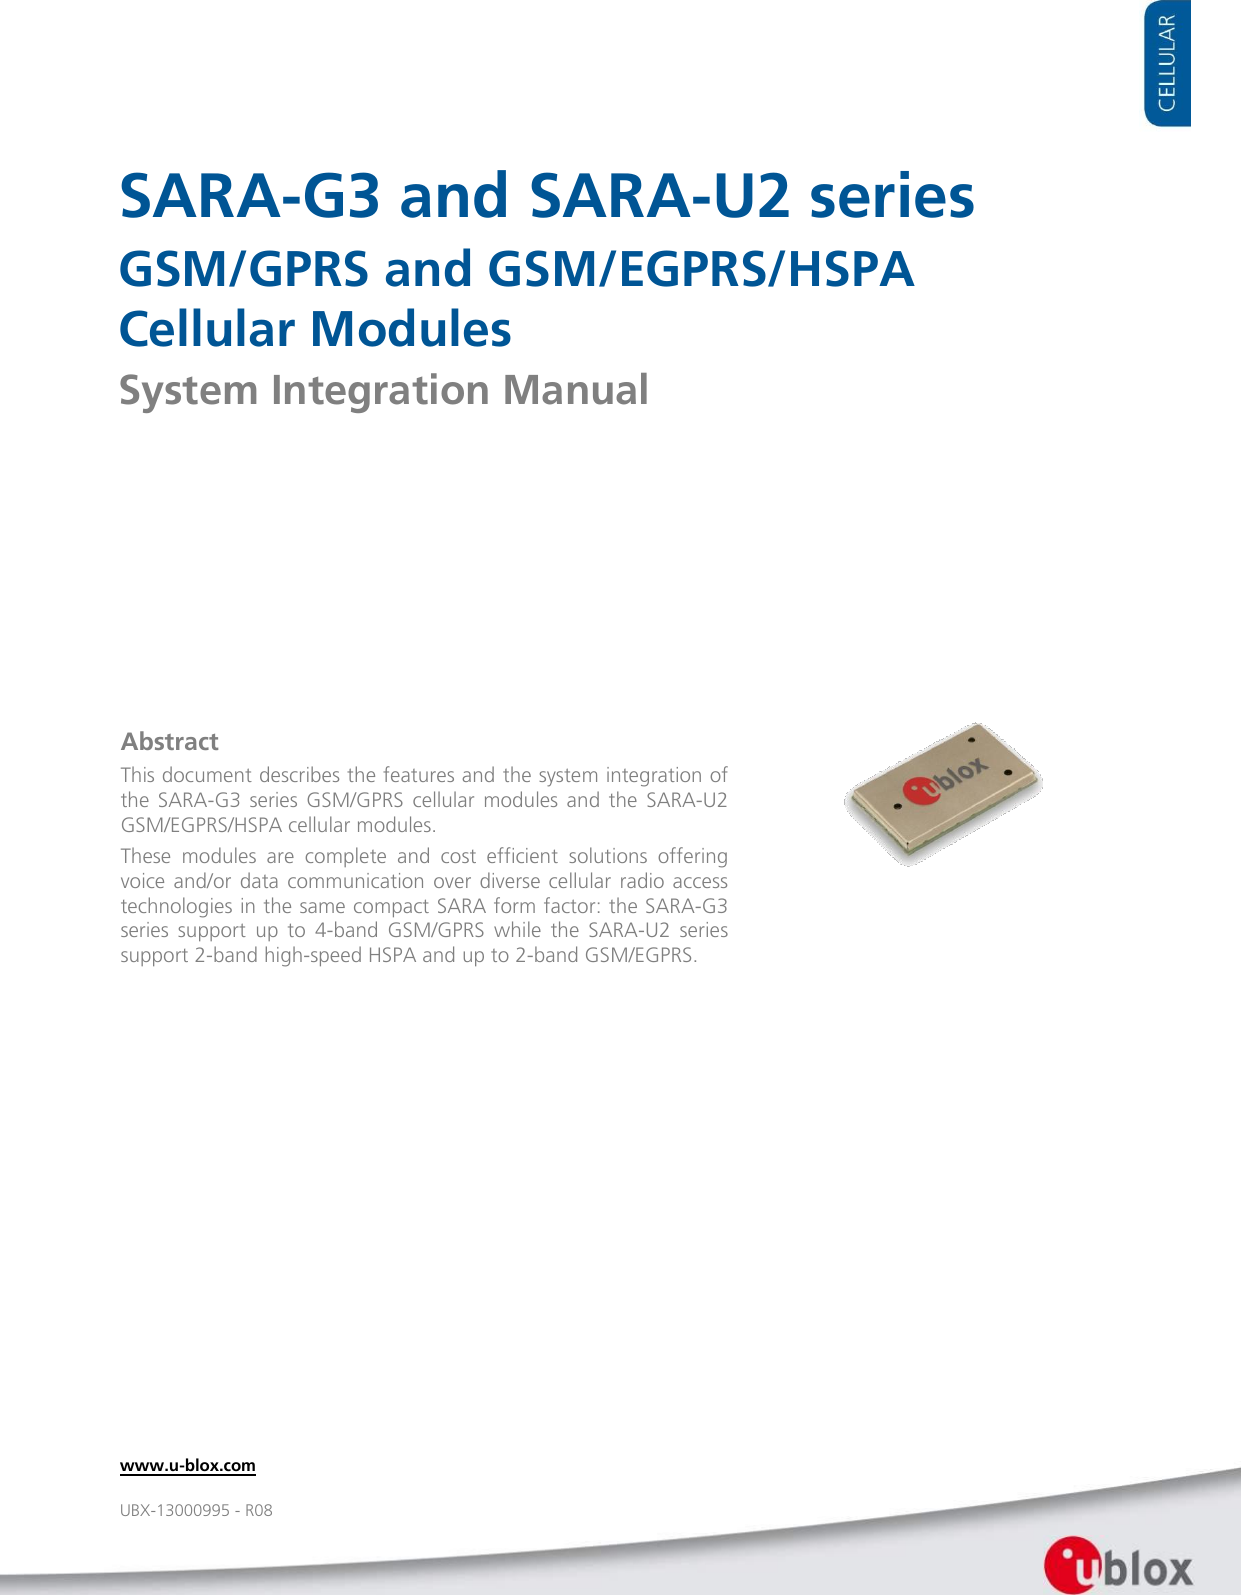     SARA-G3 and SARA-U2 series GSM/GPRS and GSM/EGPRS/HSPA  Cellular Modules System Integration Manual                   Abstract This document describes the features and the system integration of the  SARA-G3  series  GSM/GPRS  cellular  modules and  the  SARA-U2 GSM/EGPRS/HSPA cellular modules. These  modules  are  complete  and  cost  efficient  solutions  offering voice and/or data communication  over diverse  cellular  radio access technologies in the same compact SARA form factor: the SARA-G3 series  support  up  to  4-band  GSM/GPRS  while  the  SARA-U2  series support 2-band high-speed HSPA and up to 2-band GSM/EGPRS.  www.u-blox.com UBX-13000995 - R08 